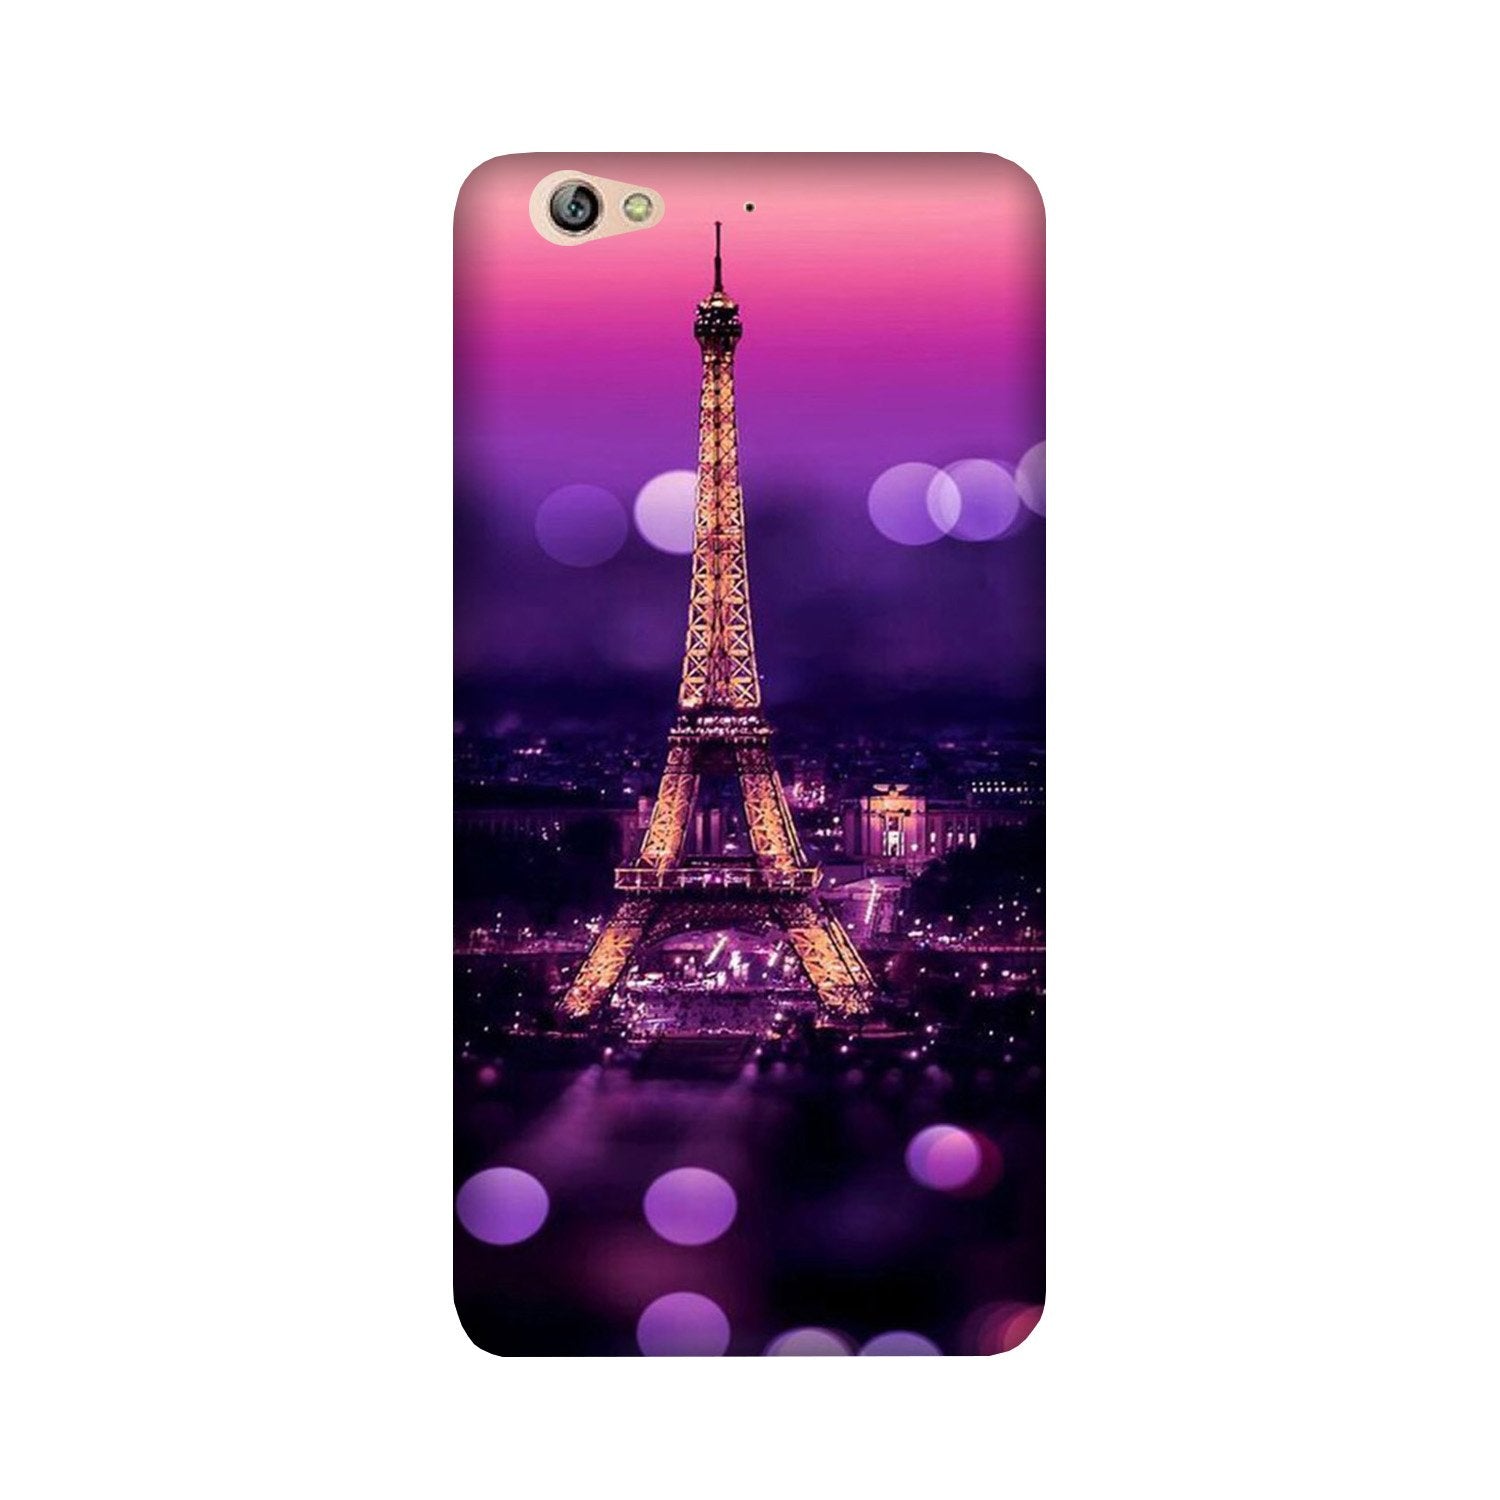 Eiffel Tower Case for Gionee S6